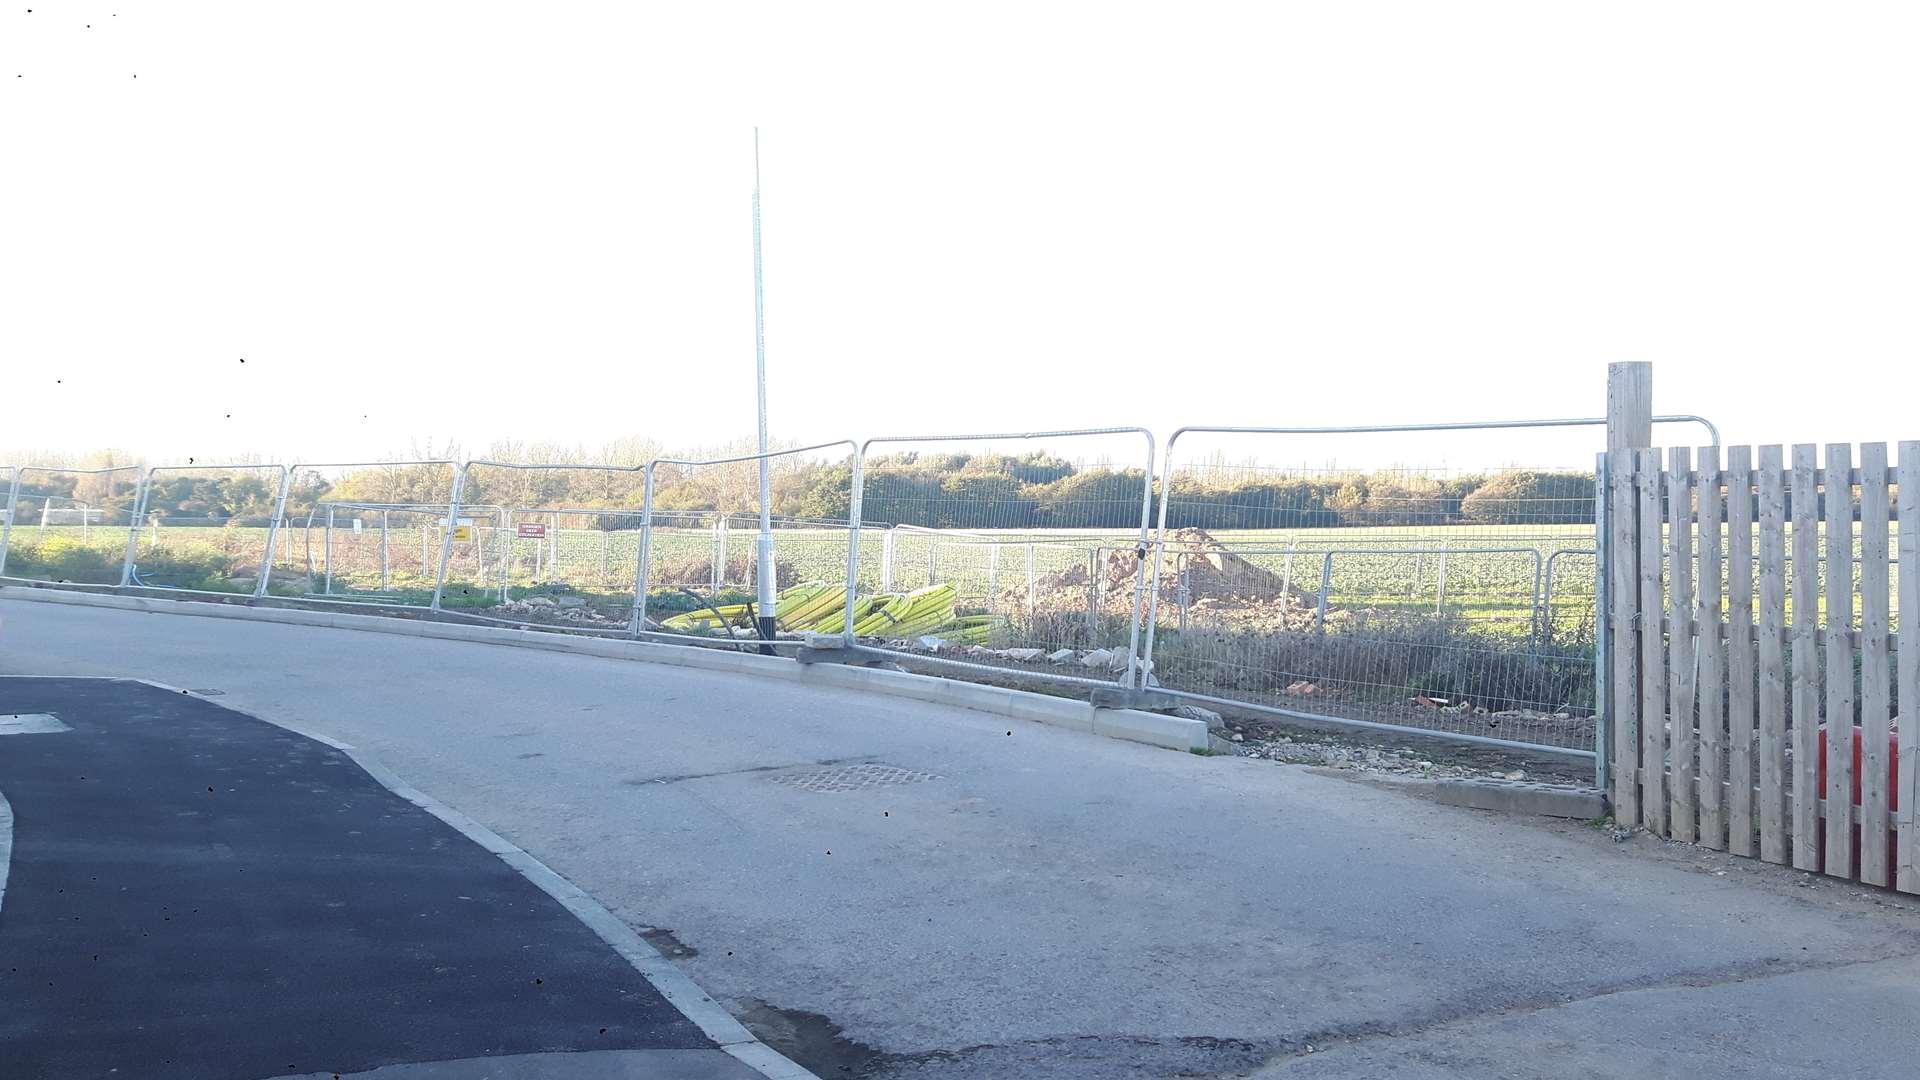 The proposed second wave of development by Timperley at Sholden, with access from Hyton Drive and Cornfield Row (pictured)